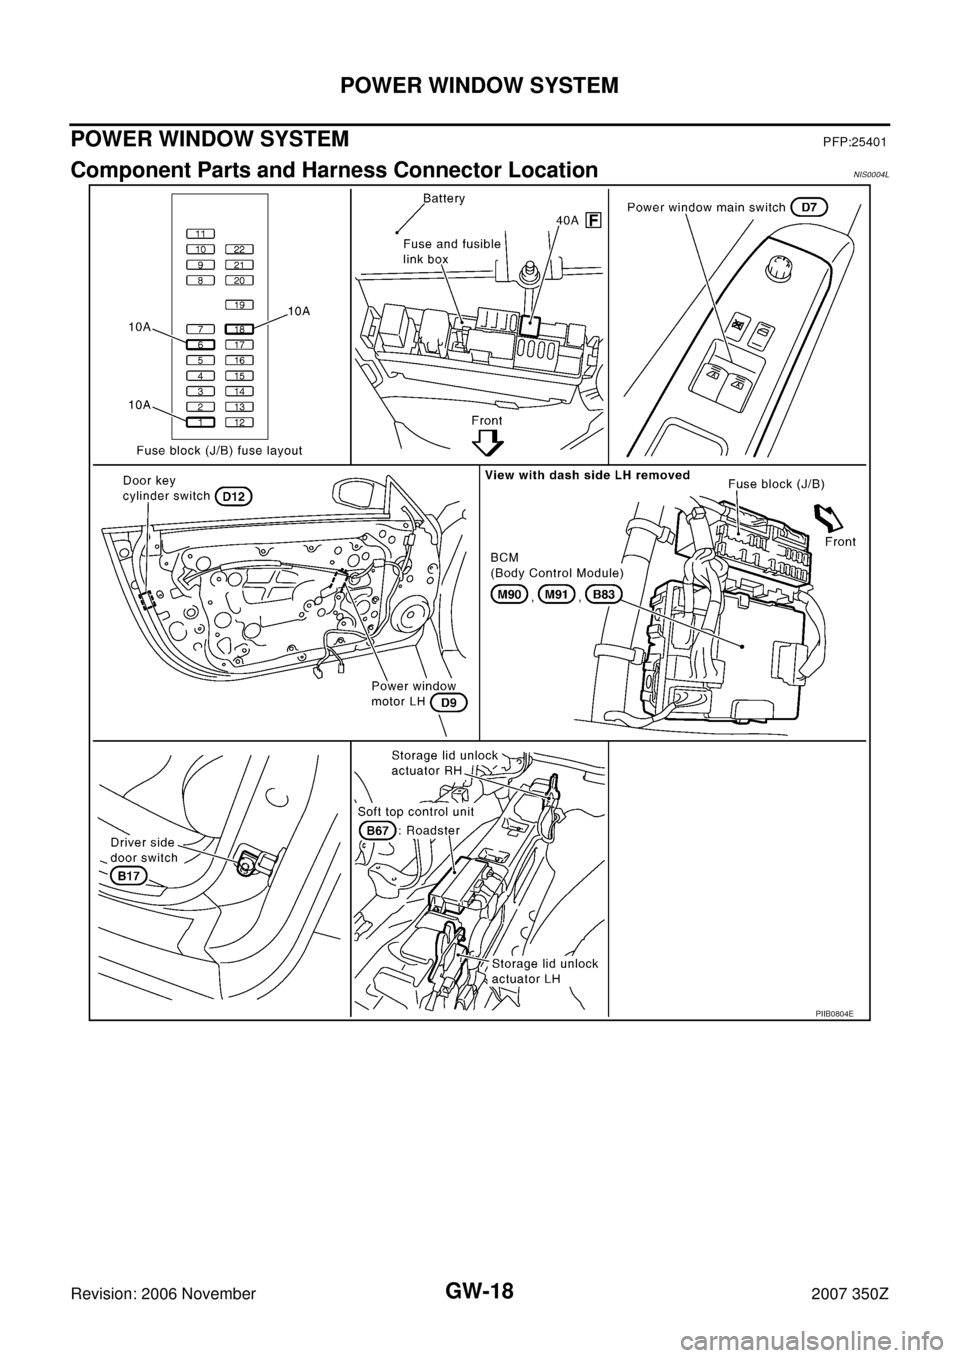 NISSAN 350Z 2007 Z33 Glasses, Windows System And Mirrors Workshop Manual GW-18
POWER WINDOW SYSTEM
Revision: 2006 November2007 350Z
POWER WINDOW SYSTEMPFP:25401
Component Parts and Harness Connector LocationNIS0004L
PIIB0804E 